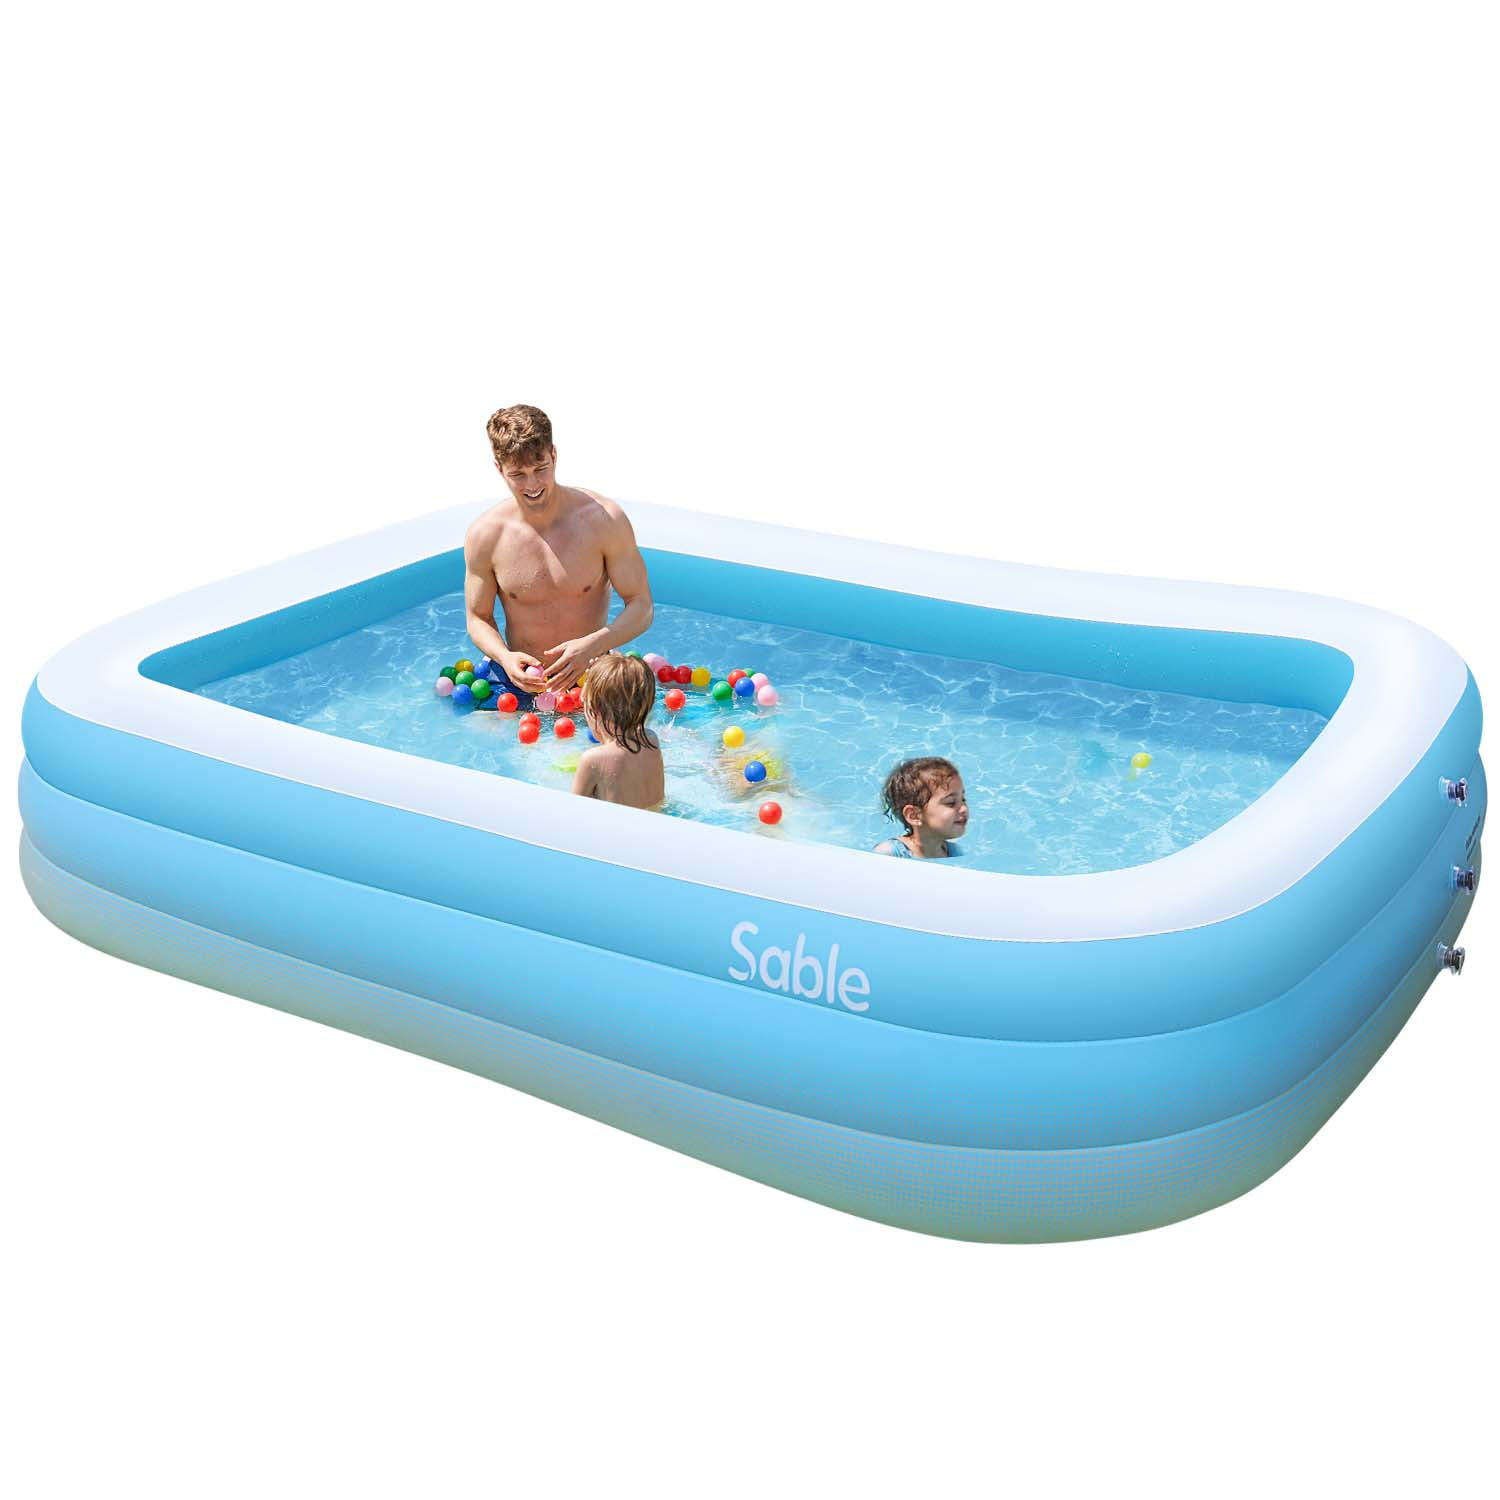 Details about   Intex Inflatable Lil Star Baby Float 47 x 32 Inch